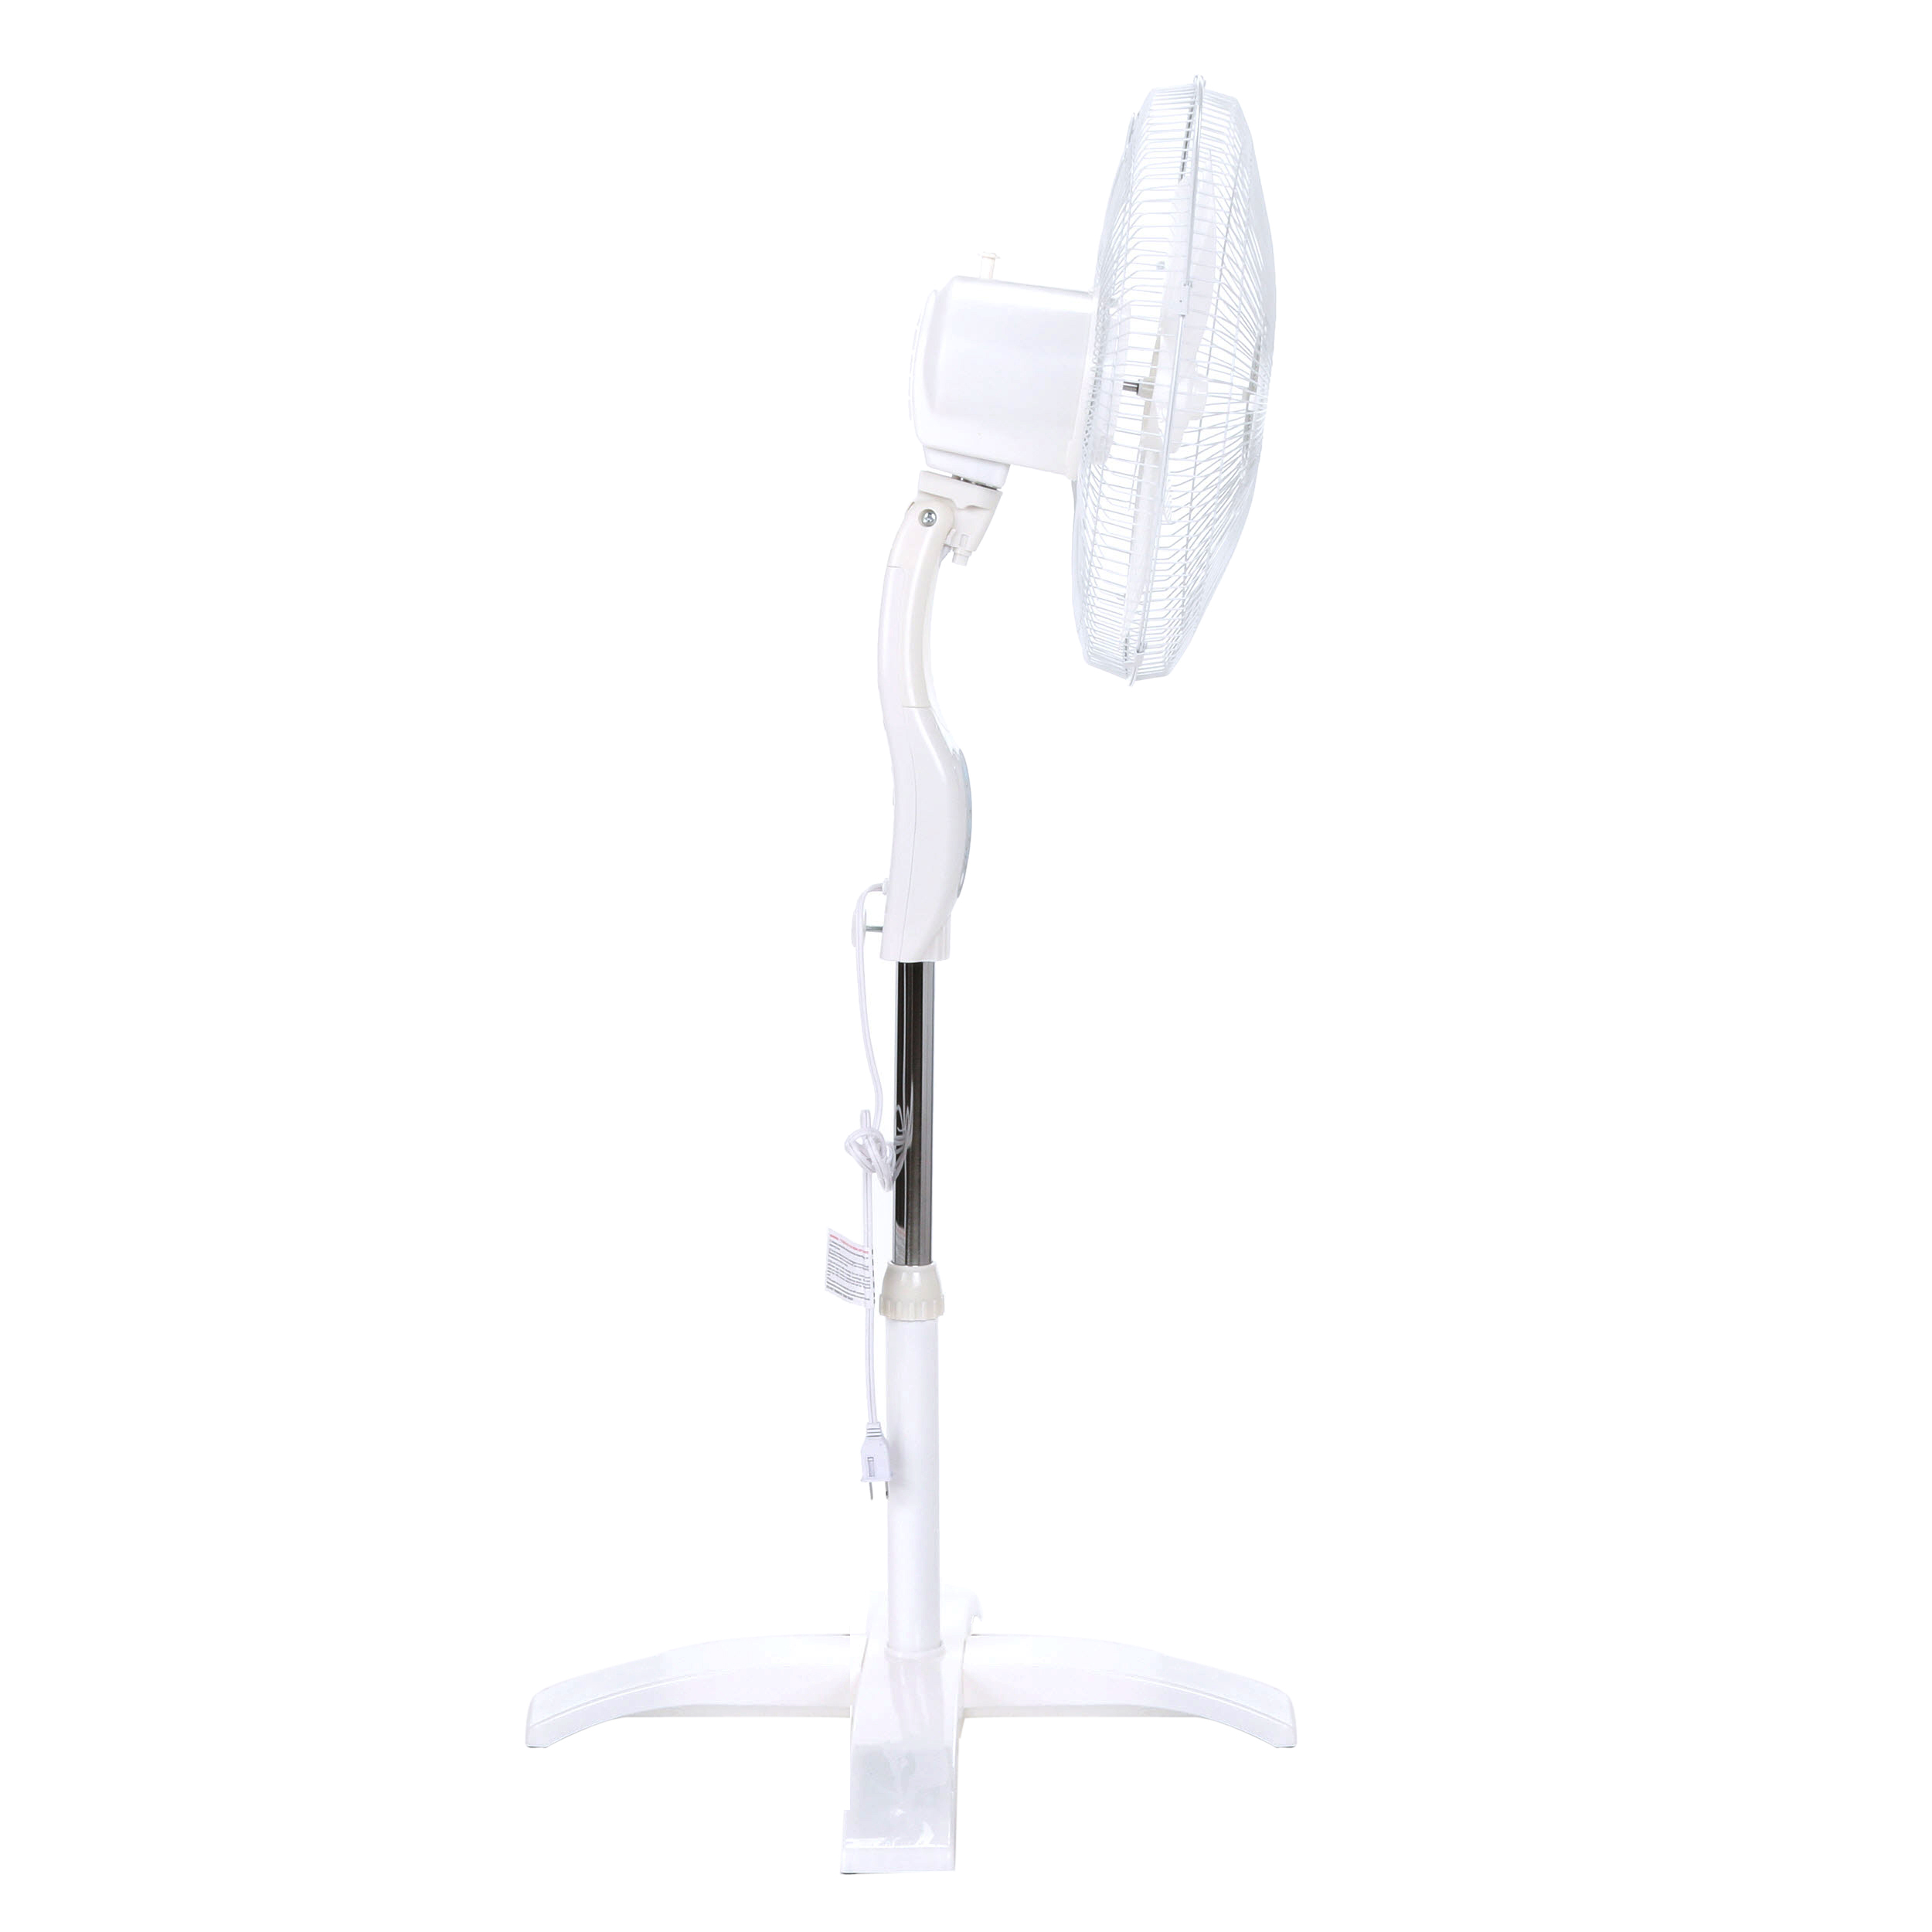 Optimus F-1760 16 inch Oscillating Electric Stand Fan with Remote, White - image 2 of 7